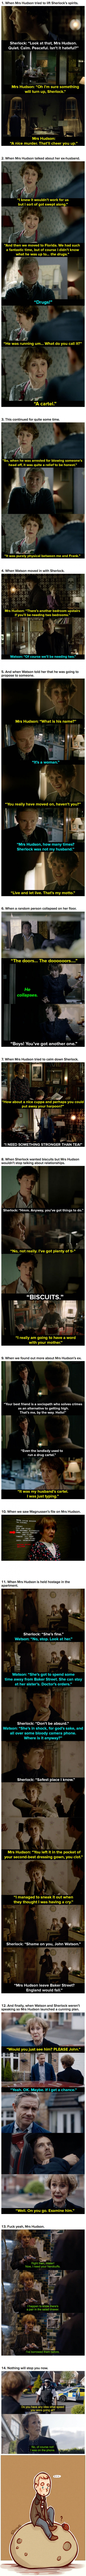 Here Is Undeniable Proof That Mrs Hudson Is The Best Thing About “Sherlock”